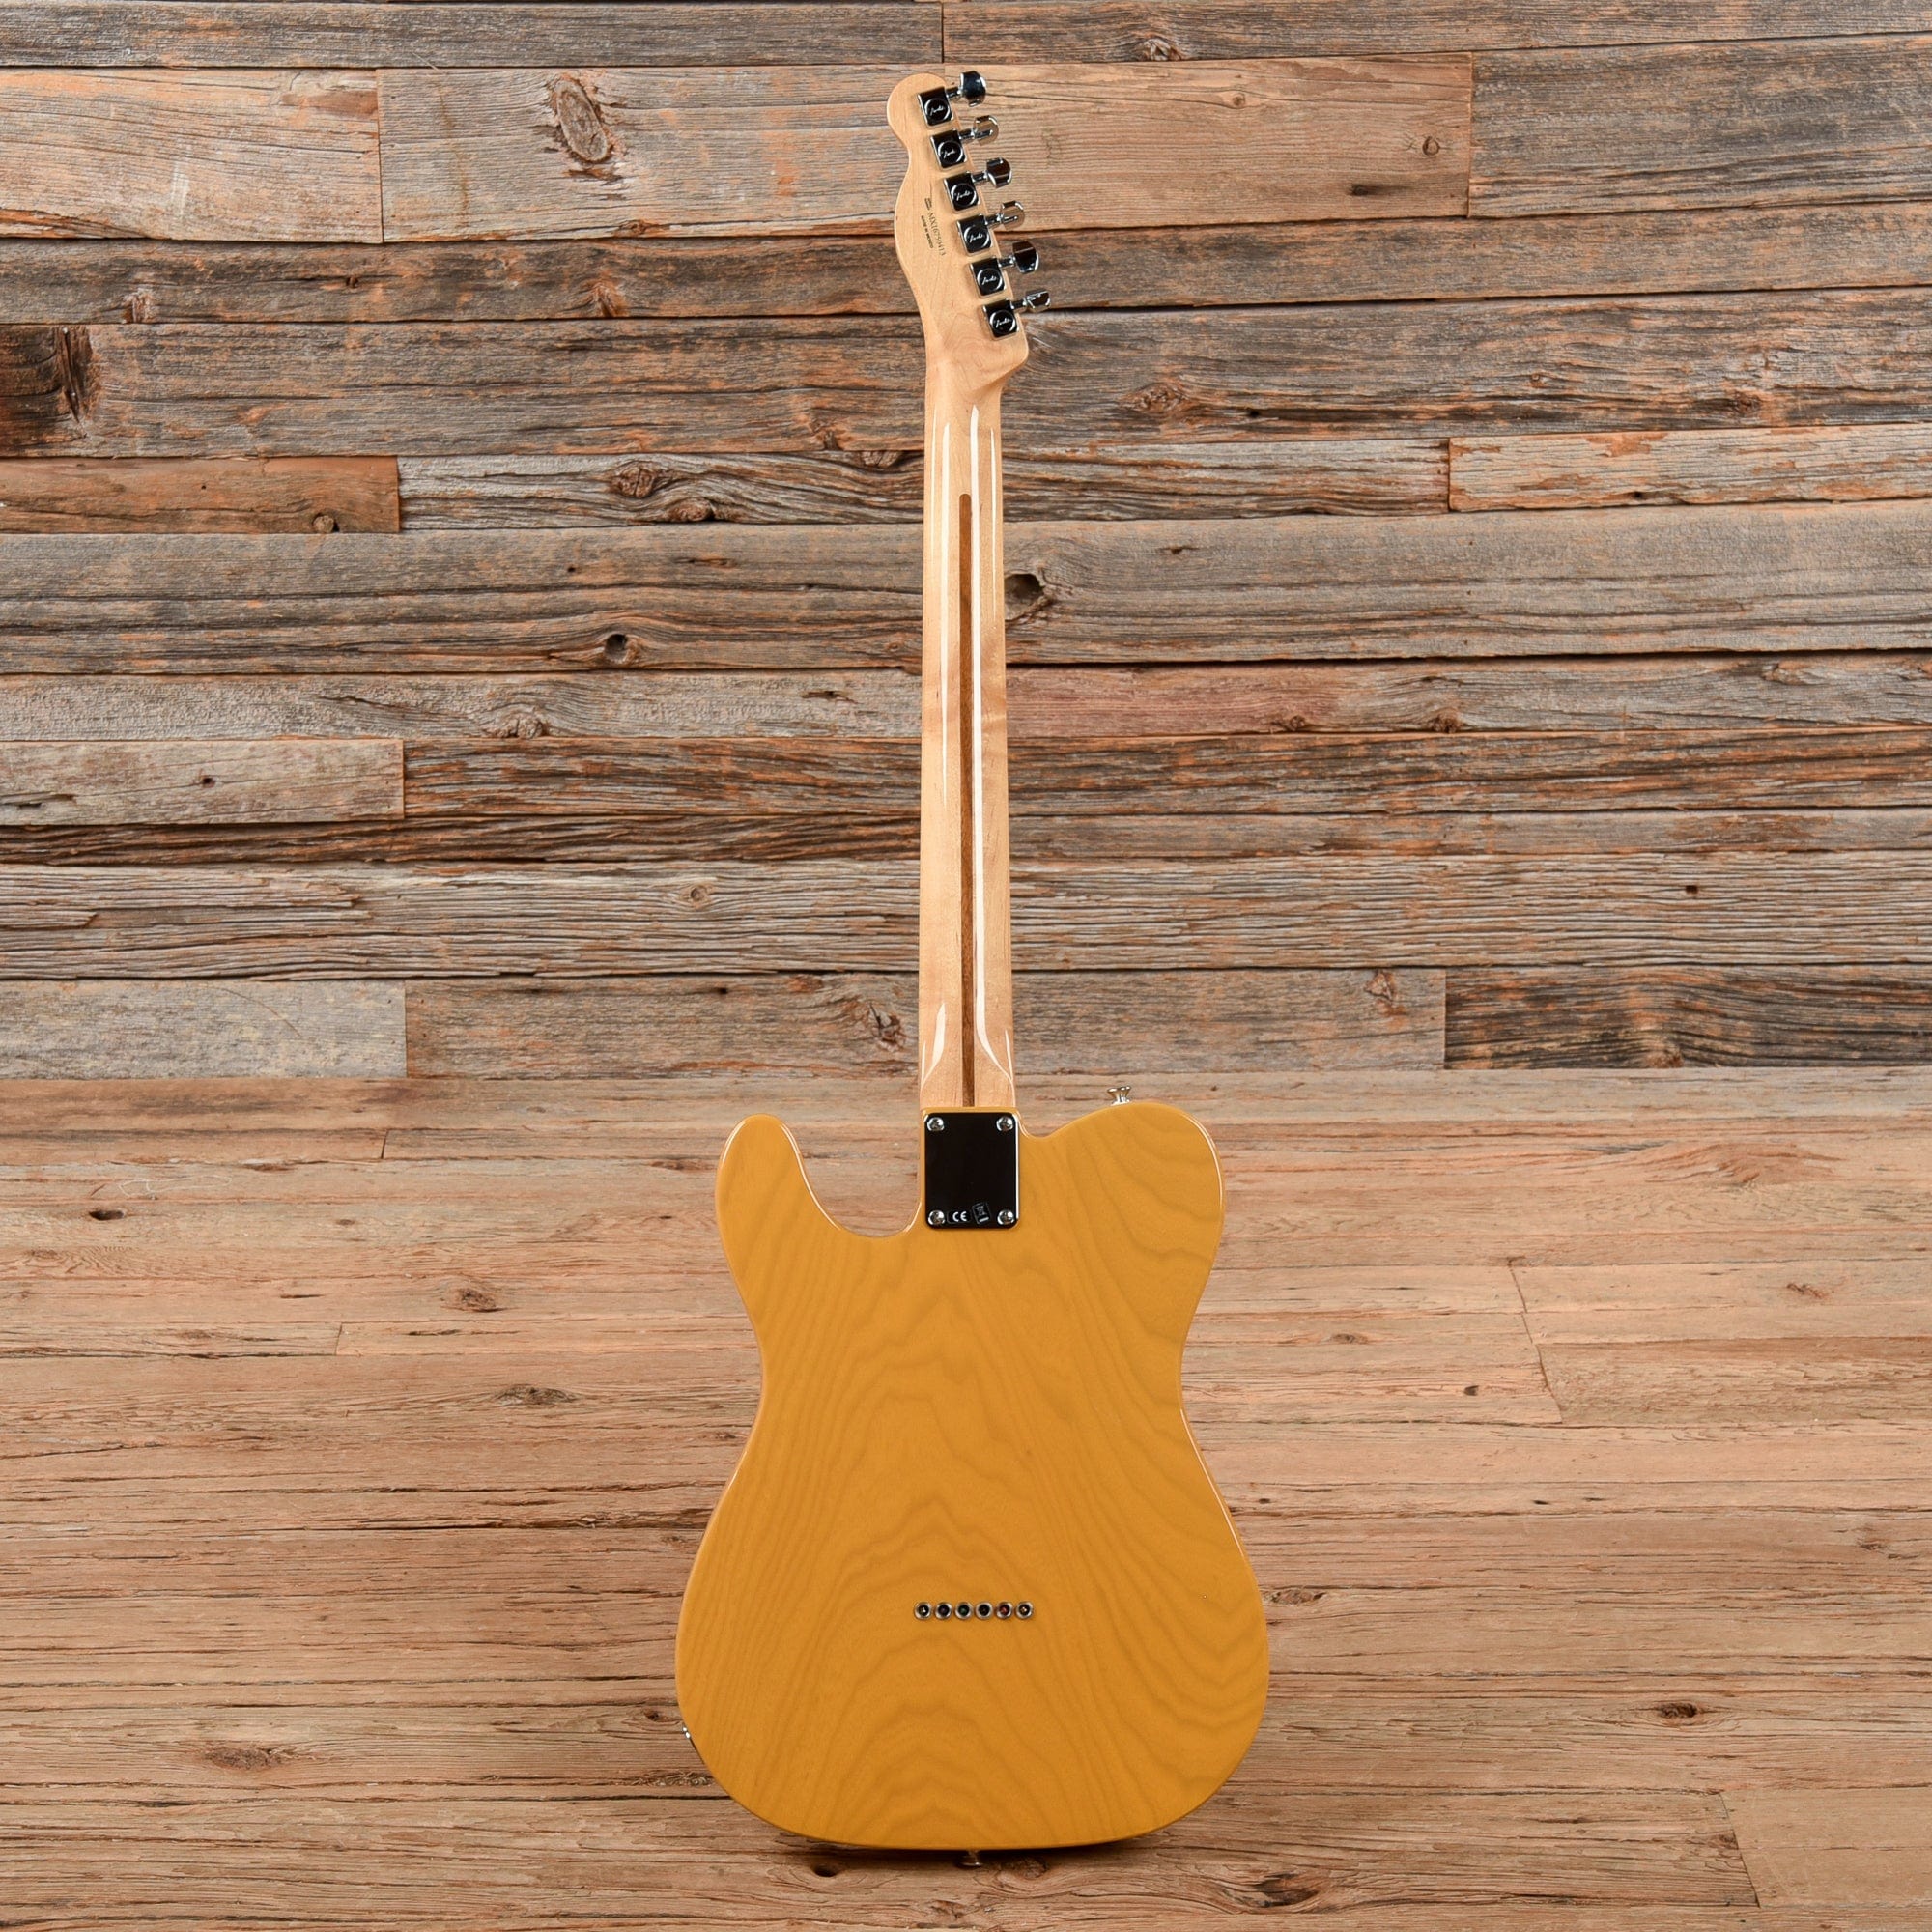 Fender Special Edition Deluxe Ash Telecaster Butterscotch Blonde 2016 Electric Guitars / Solid Body